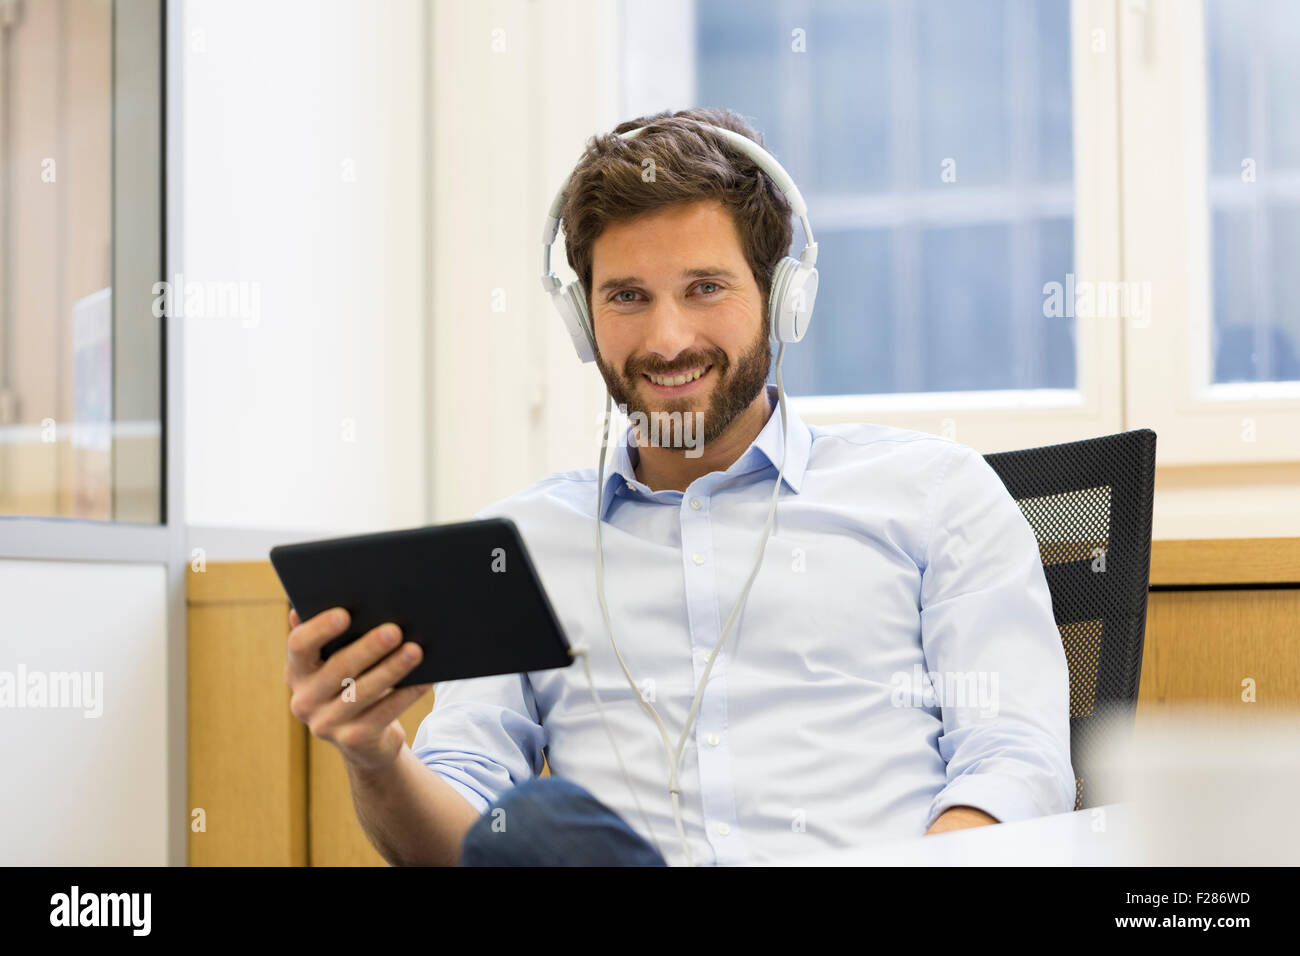 Cheering creative businessman listening to headphones and using digital tablet. Stock Photo